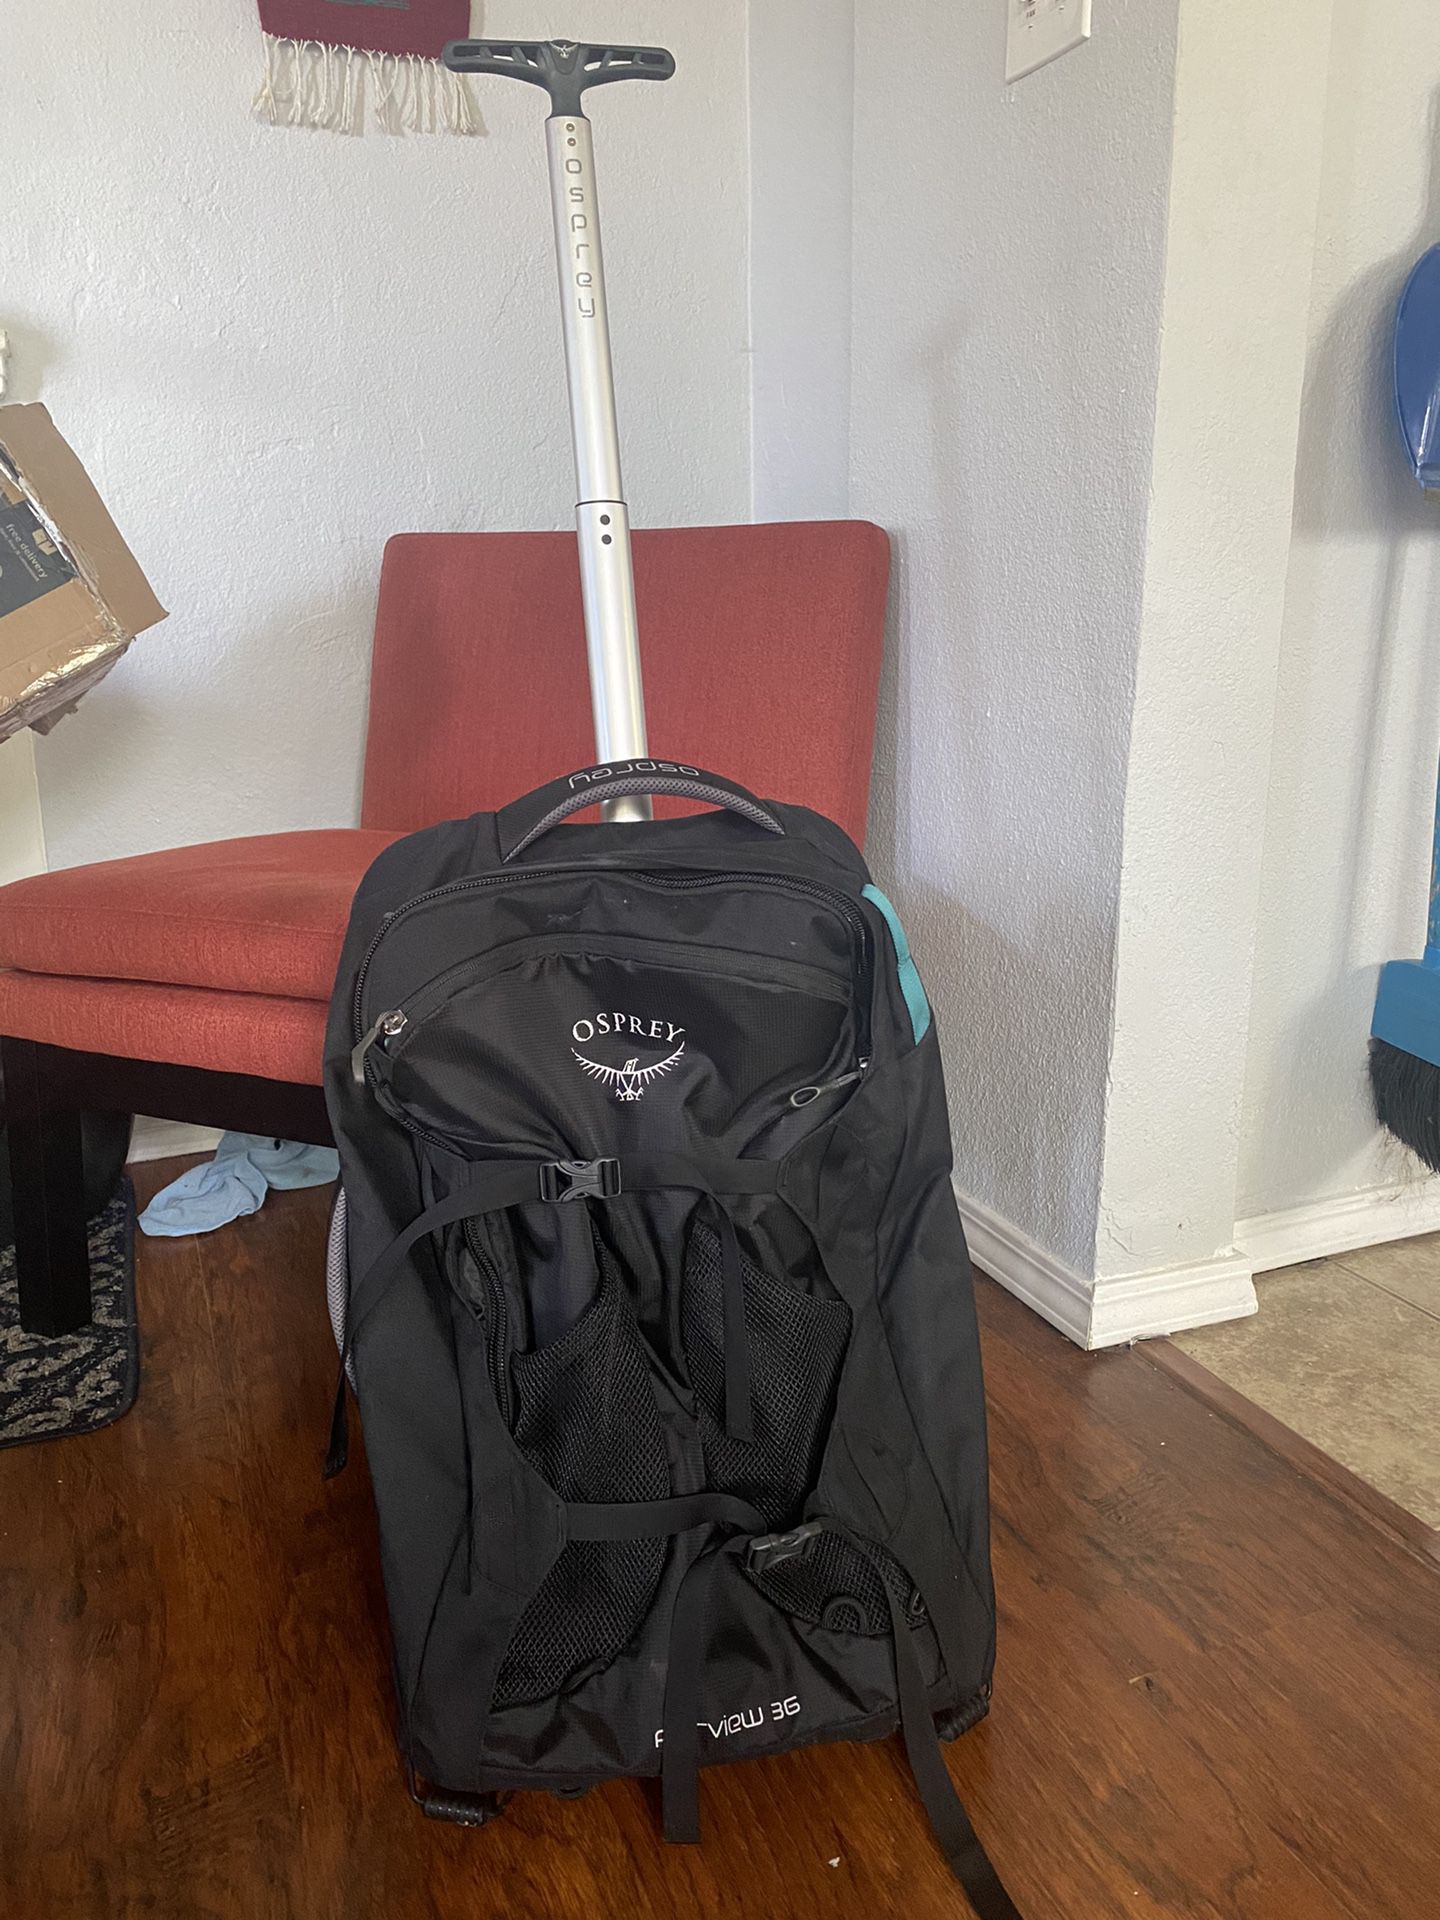 Osprey Fairview 36 Travel Bag Backpack Luggage